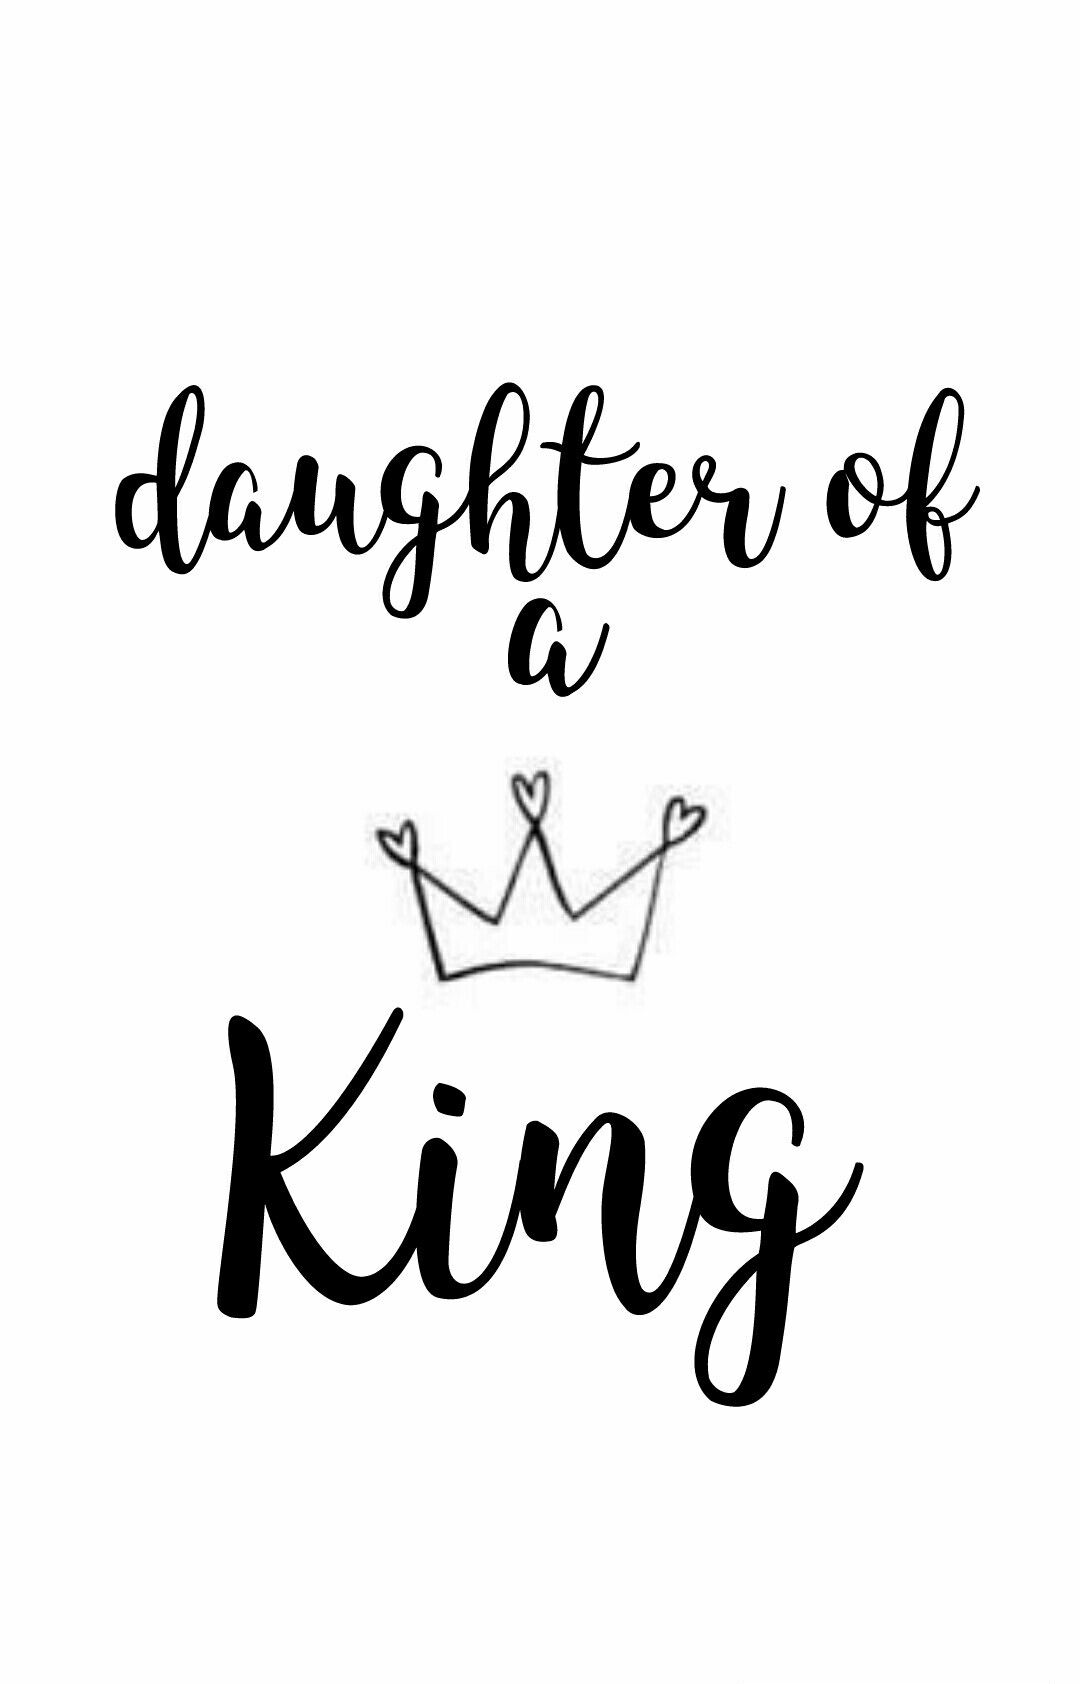 Daughter of a king wallpaper âââ quote aesthetic quotes to live by daughter of god